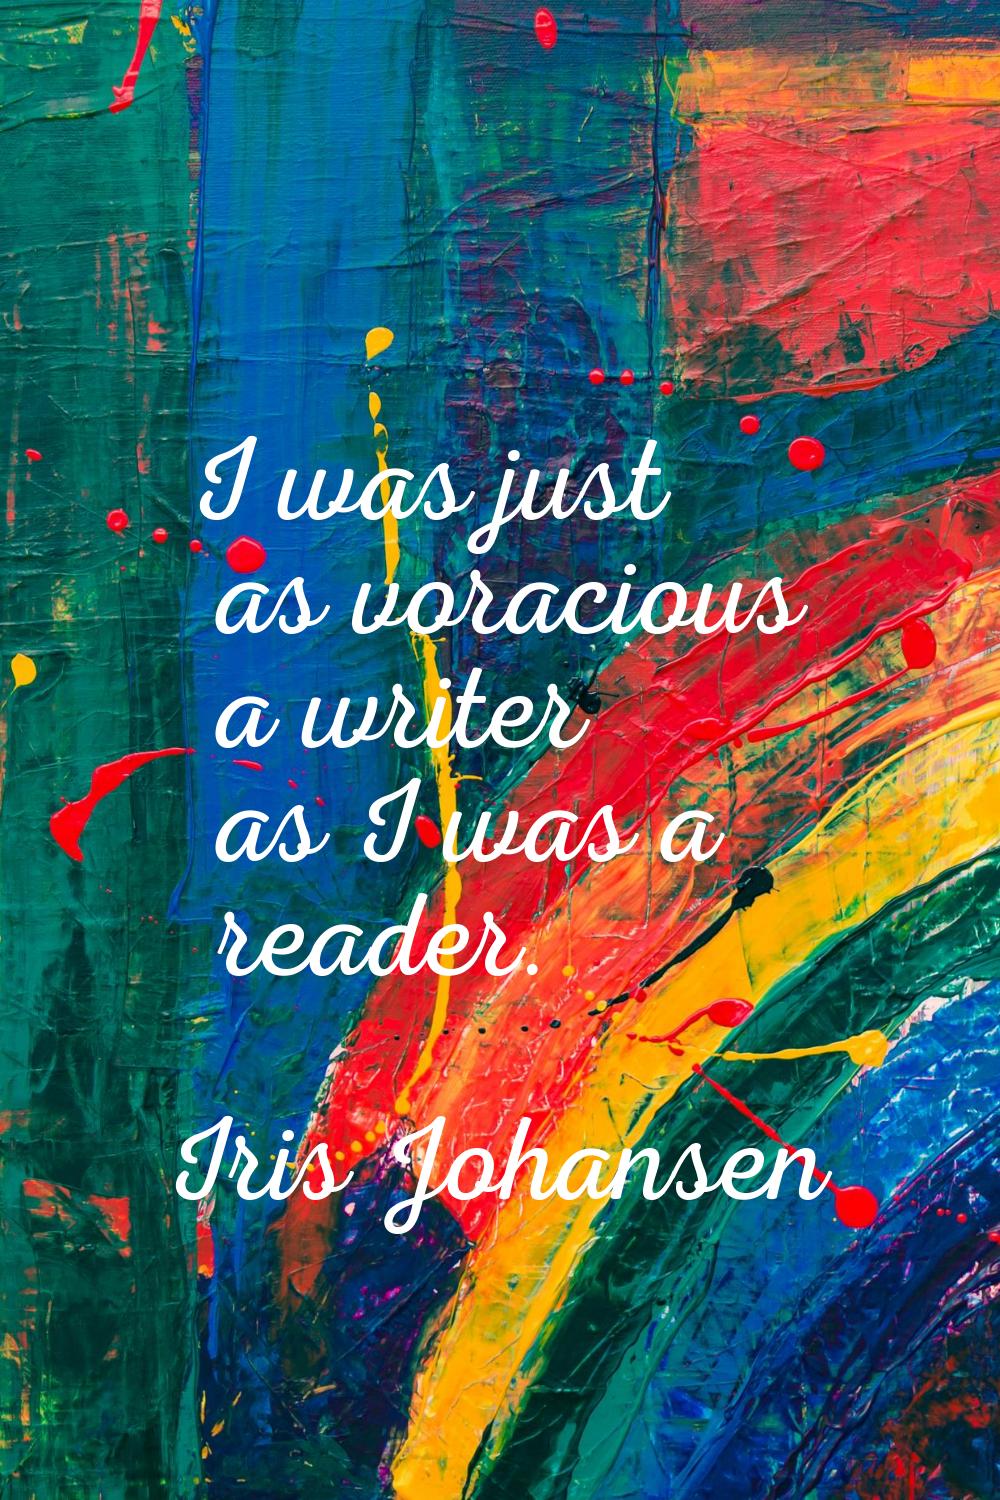 I was just as voracious a writer as I was a reader.